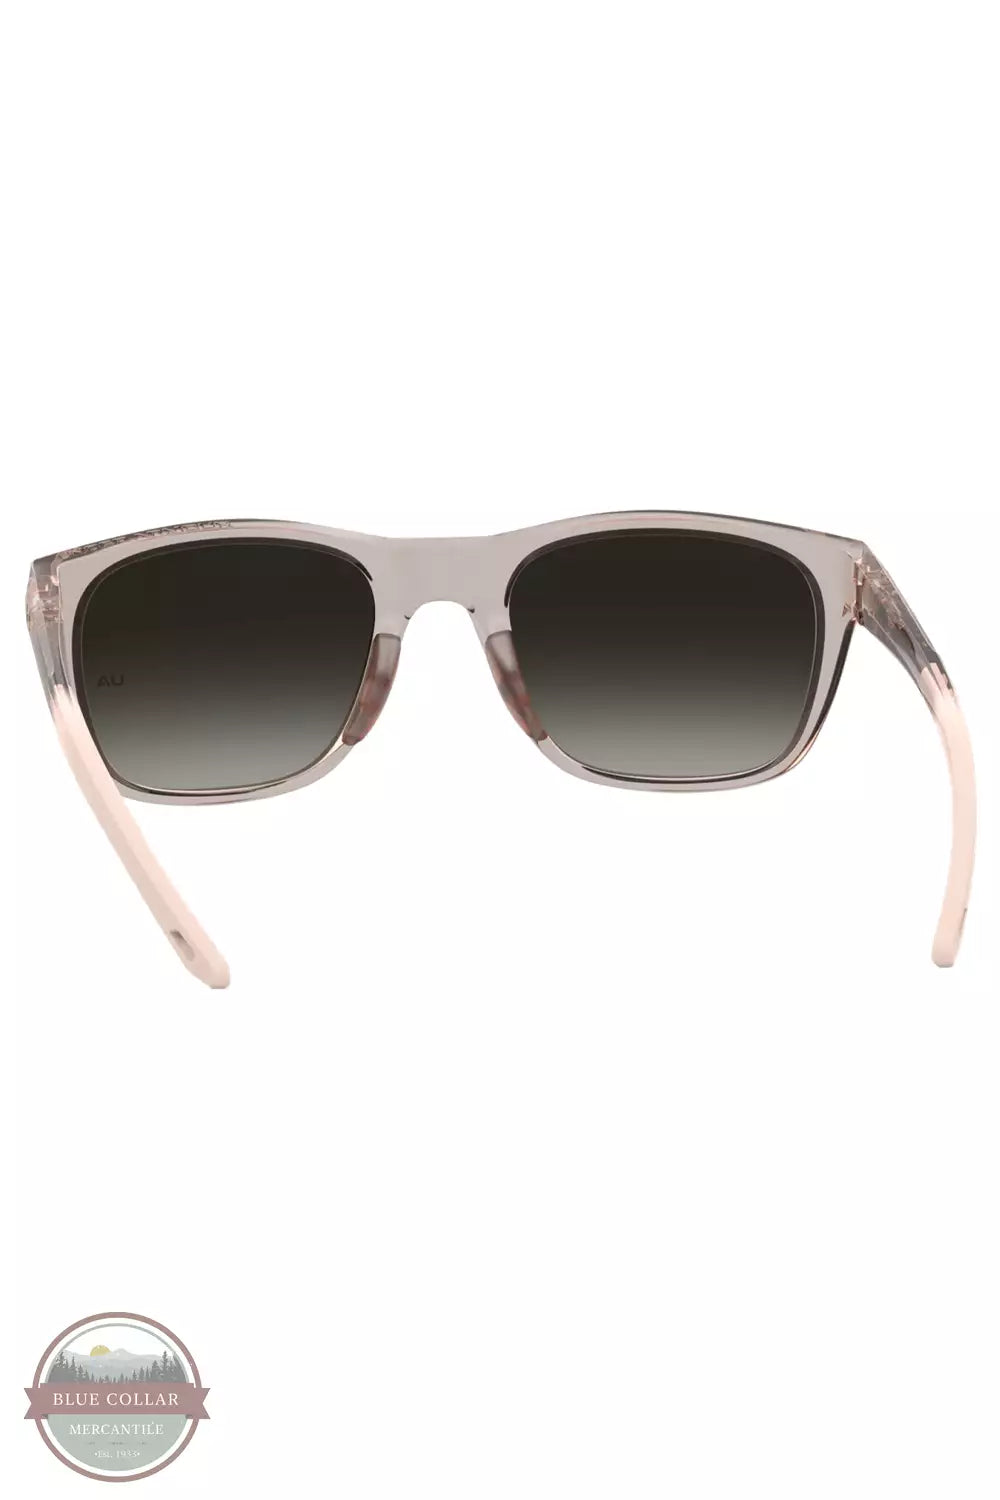 Under Armour 1369312-663 Raid Sunglasses in Pink Clay / Shiny Gold Inside View